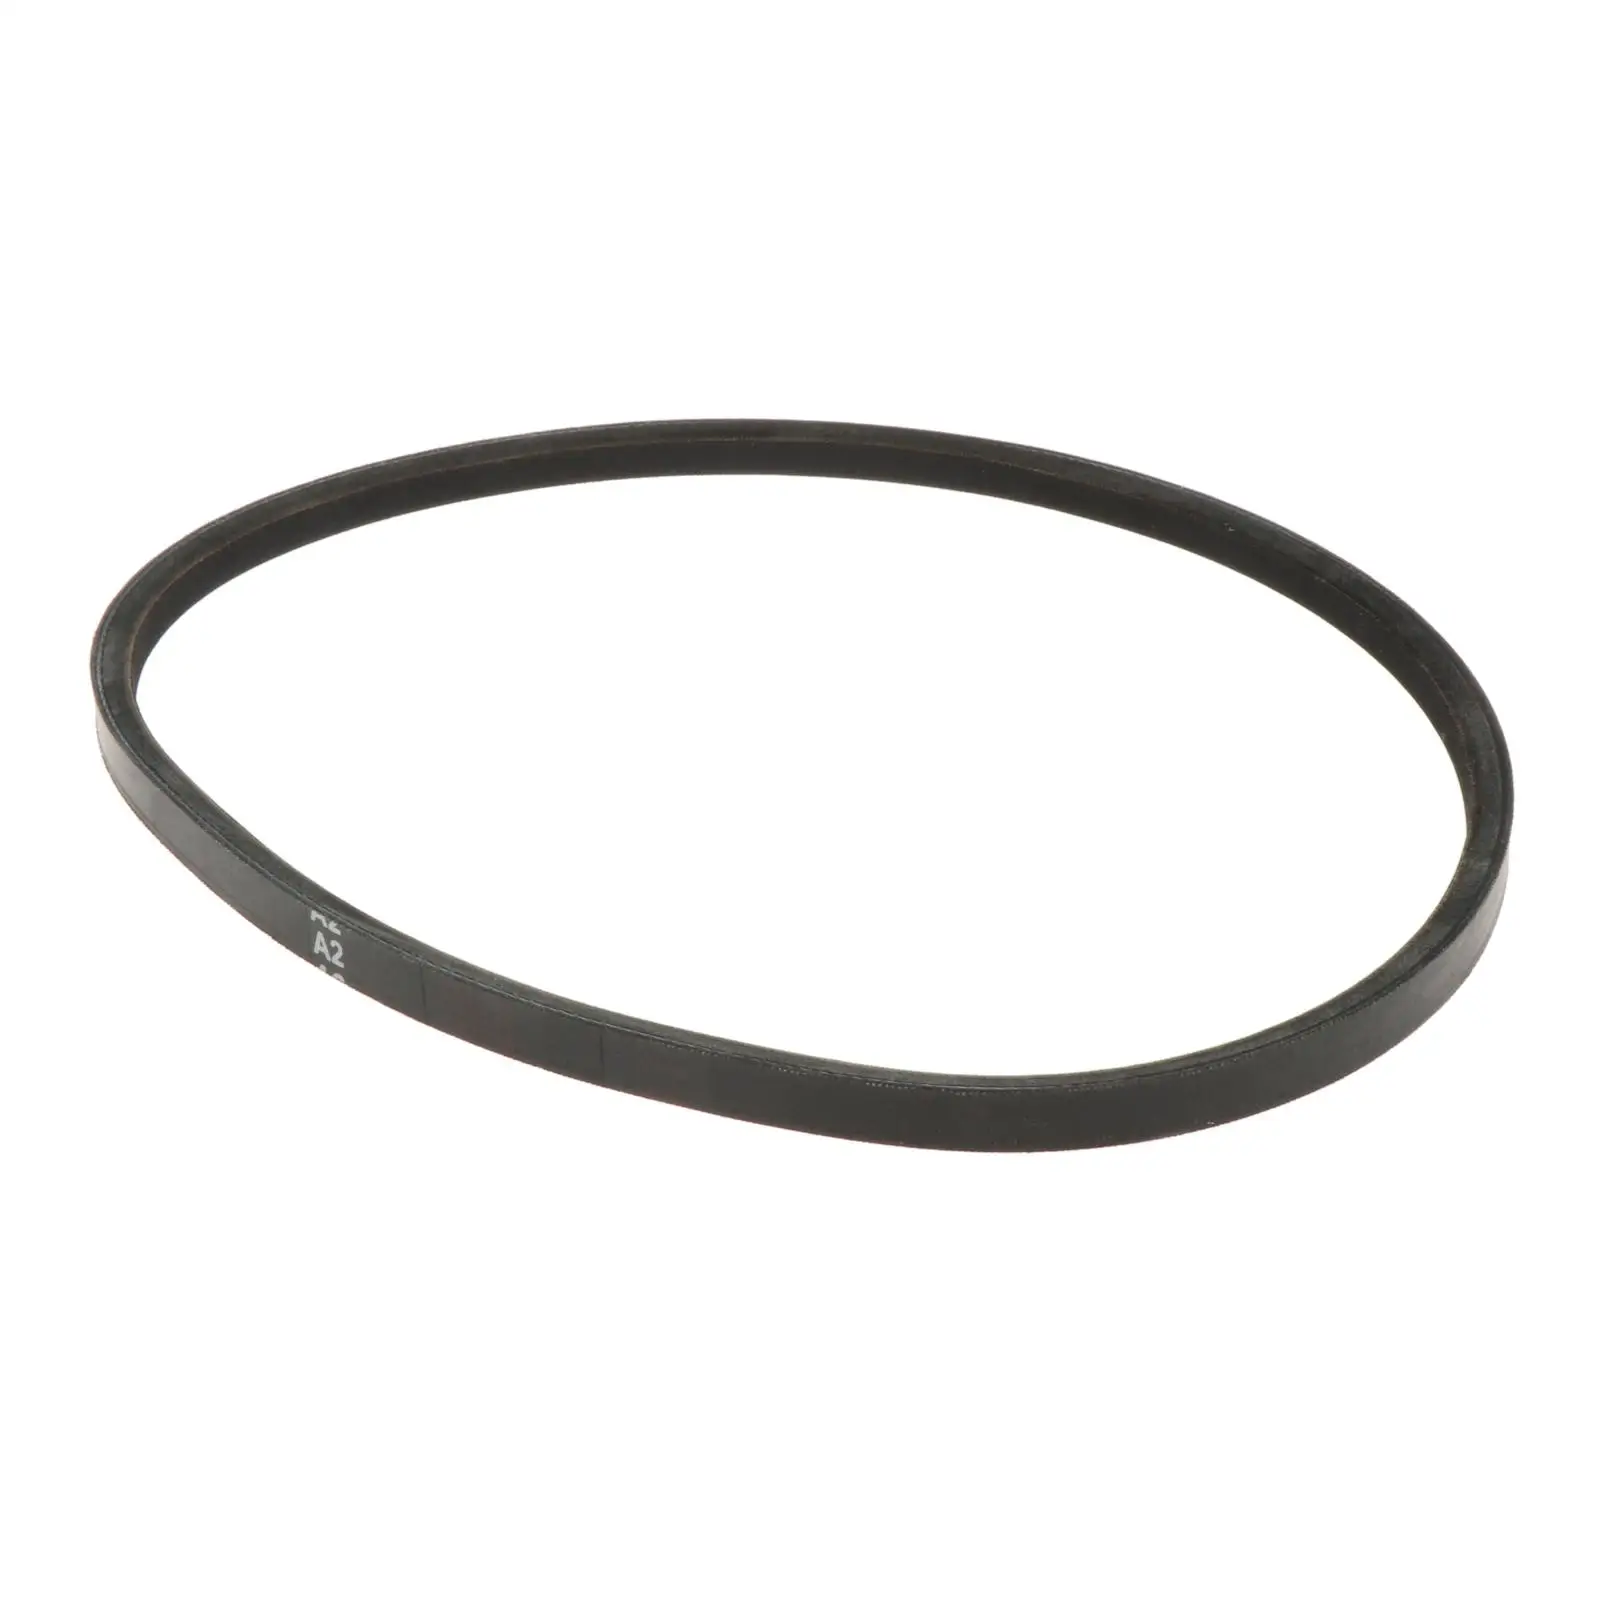 Starter  Belt Replacement for  26414G01 630587 1991 Cycle High Performance